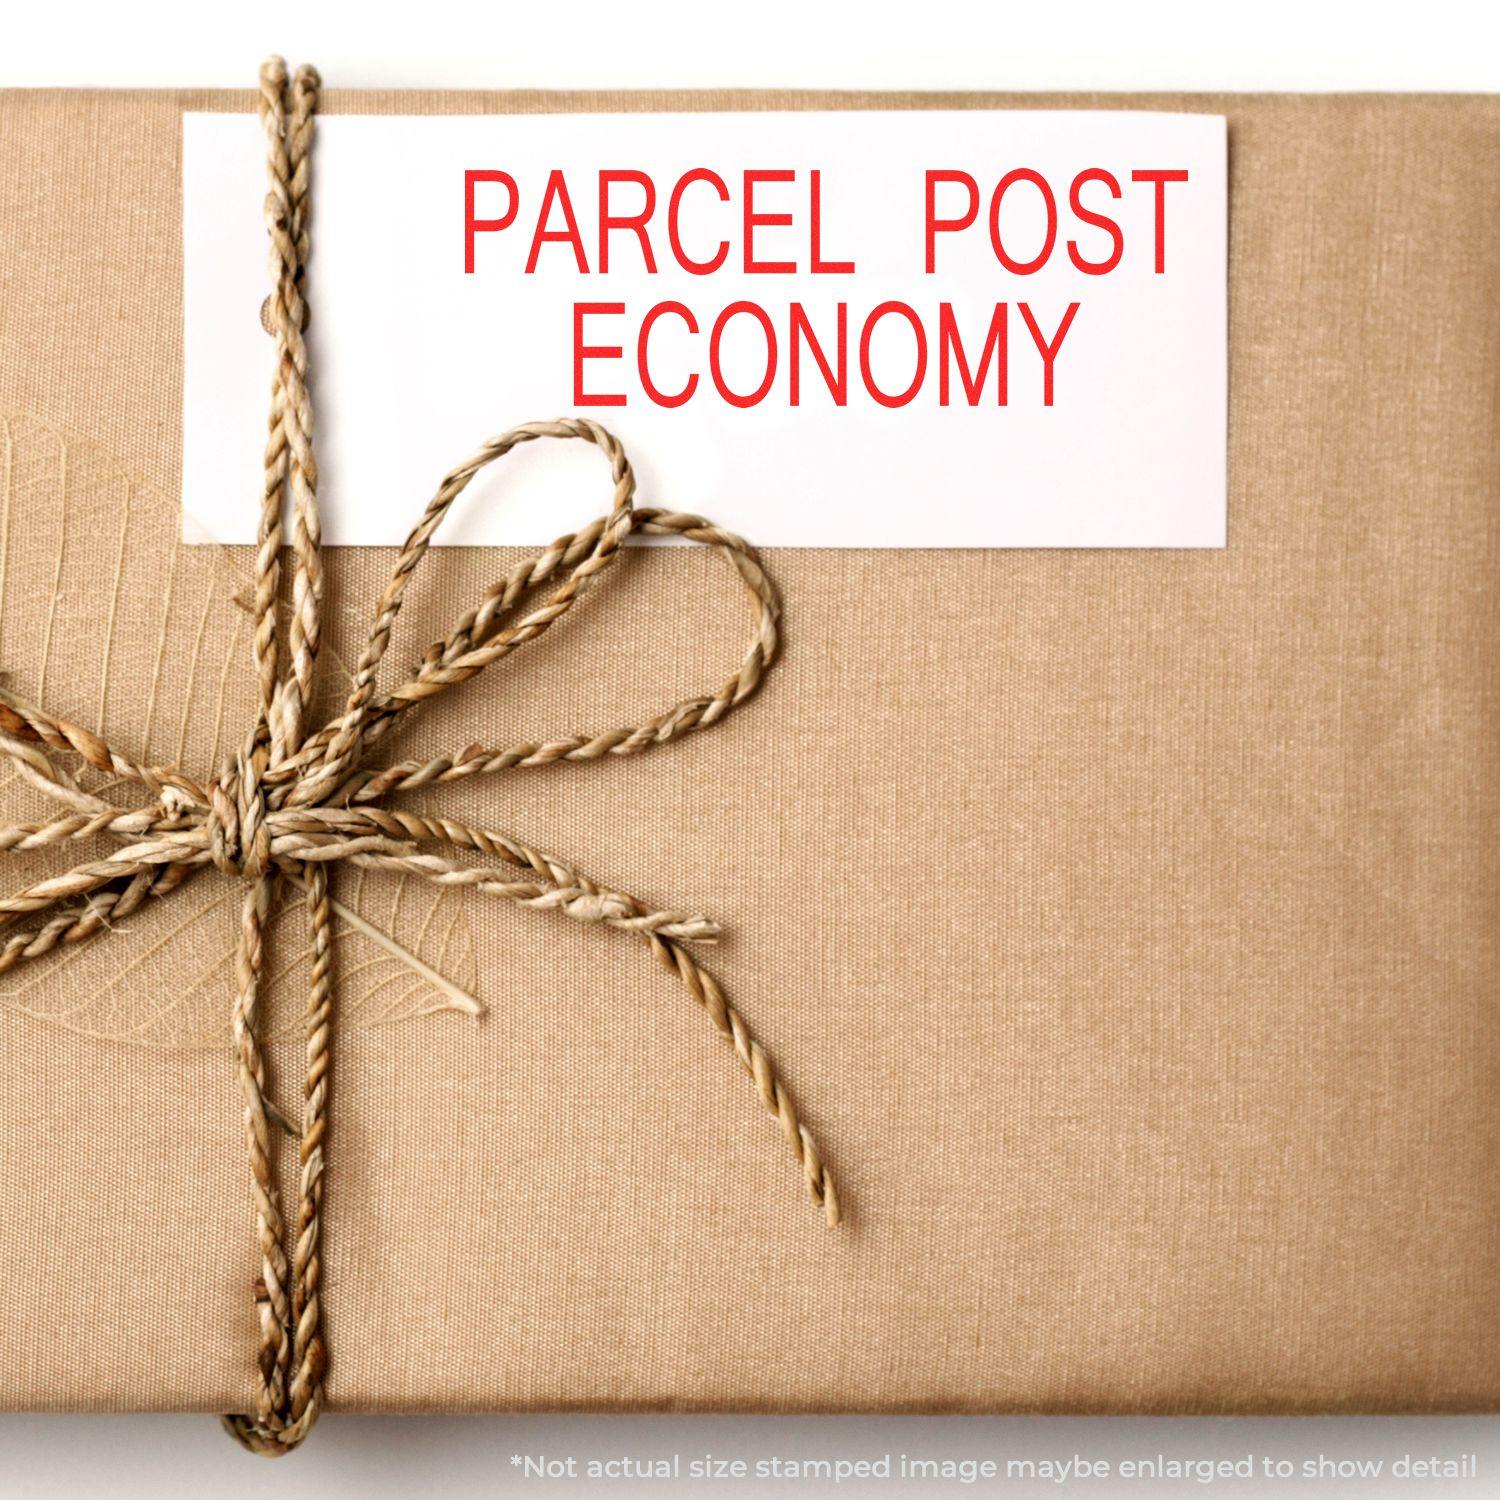 In Use Large Pre-Inked Parcel Post Economy Stamp Image